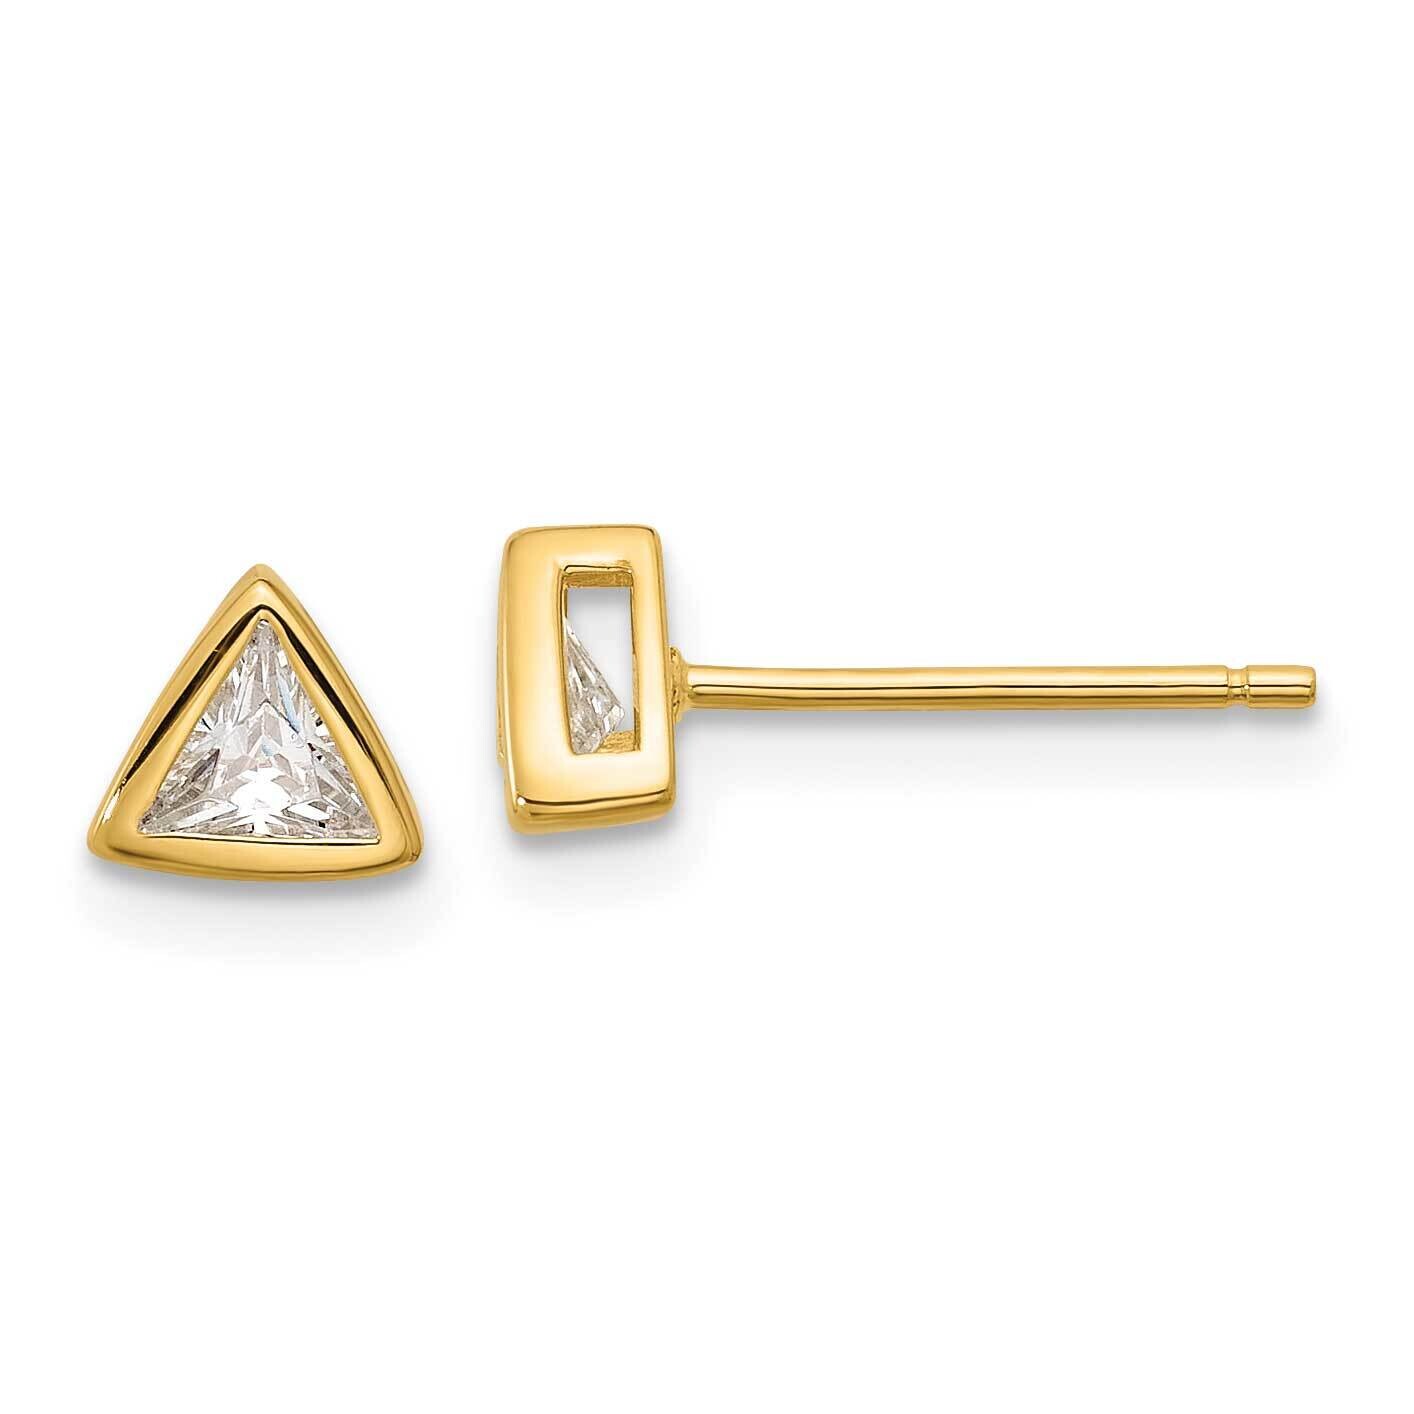 Gold-Tone Polished 4mm CZ Triangle Post Stud Earrings Sterling Silver QE17127GP